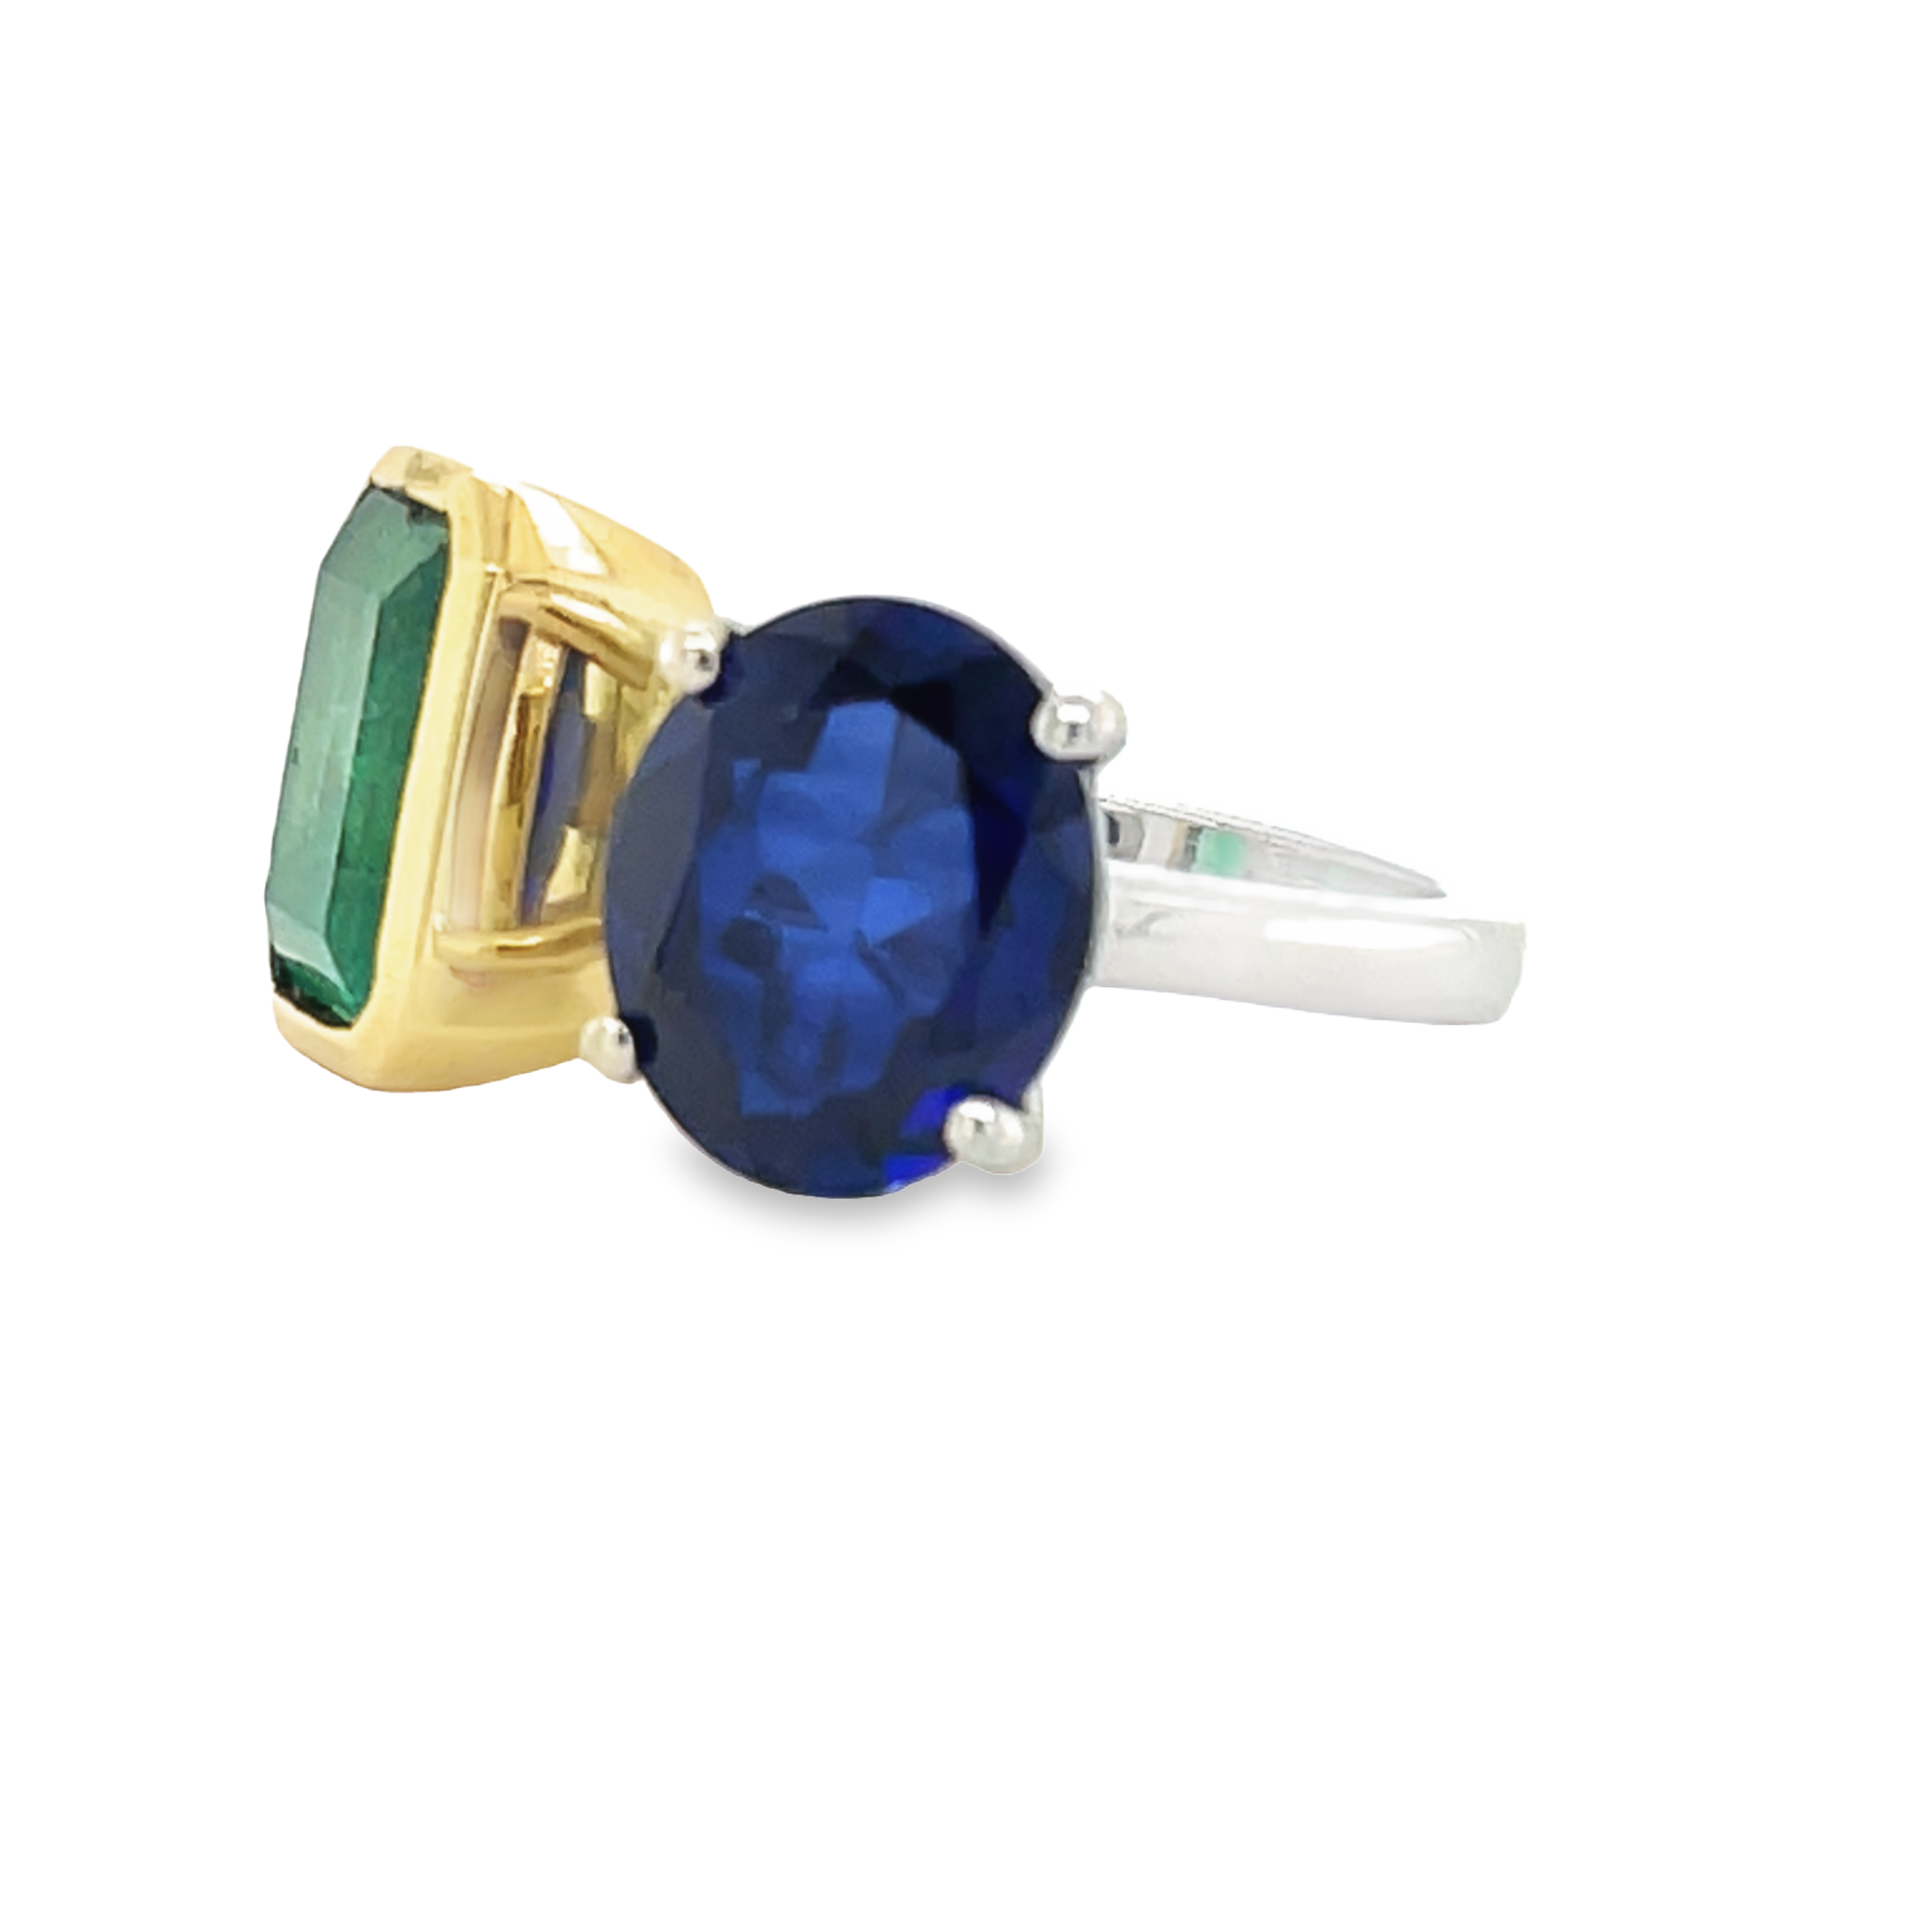 Beautiful custom made ring  Platinum & 18k yellow gold setting  Colombian emerald (emerald cut) 4.71 cts bezel set in yellow gold  Oval tanzanite 3.62 cts set four prong basket.  Toi & Moi design  12.00 x 12.00 mm   2.30 mm wide  Size 6.5 (sizeable)